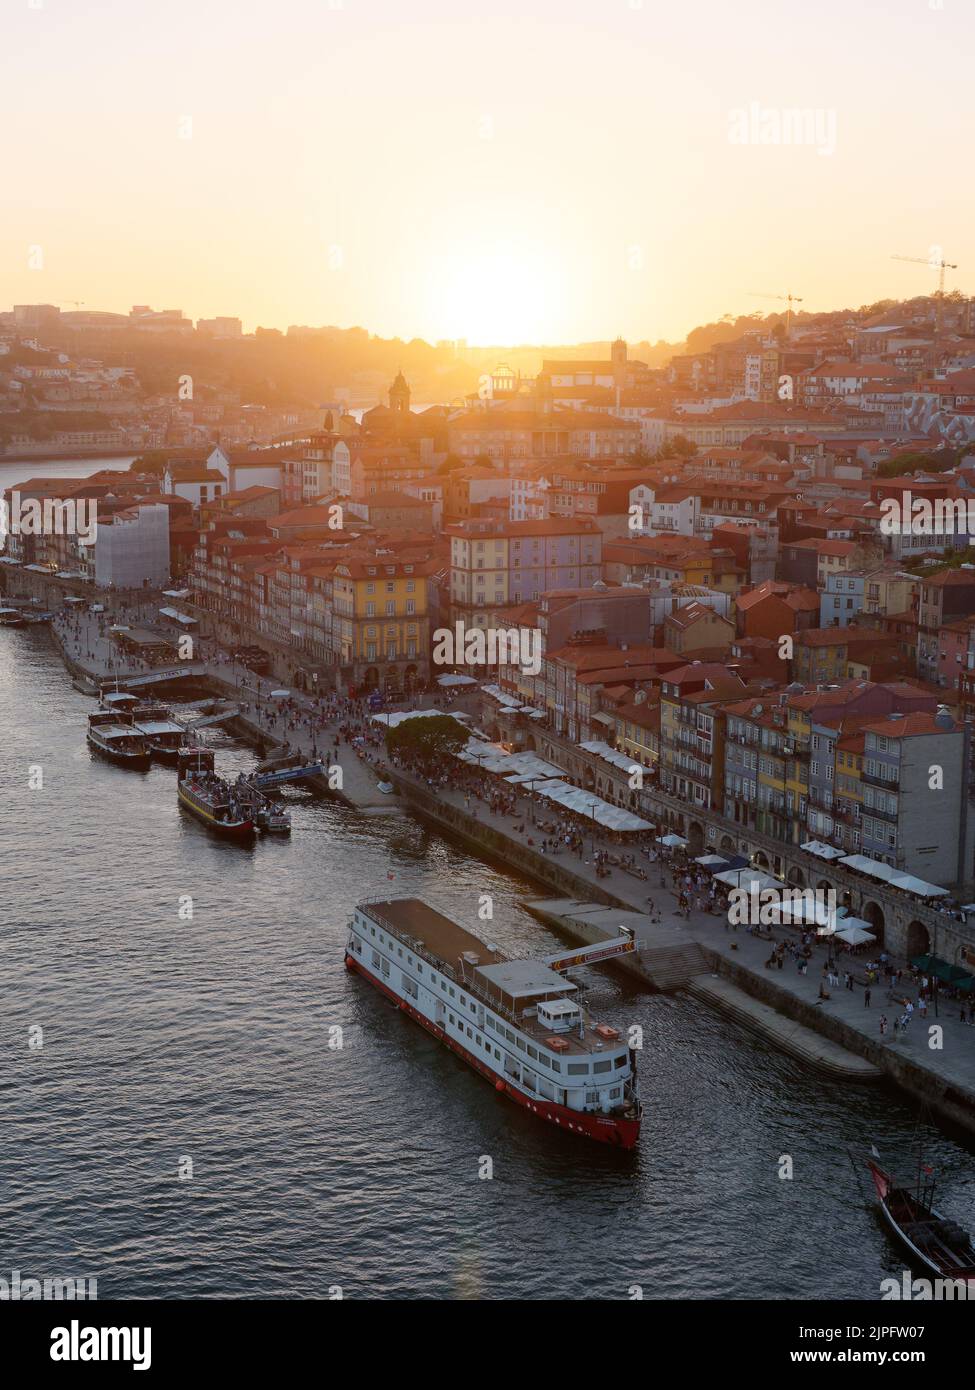 Elevated view of the Ribeira riverfront district and the Douro river in Porto, Portugal. Boats are moored in the harbour. Stock Photo